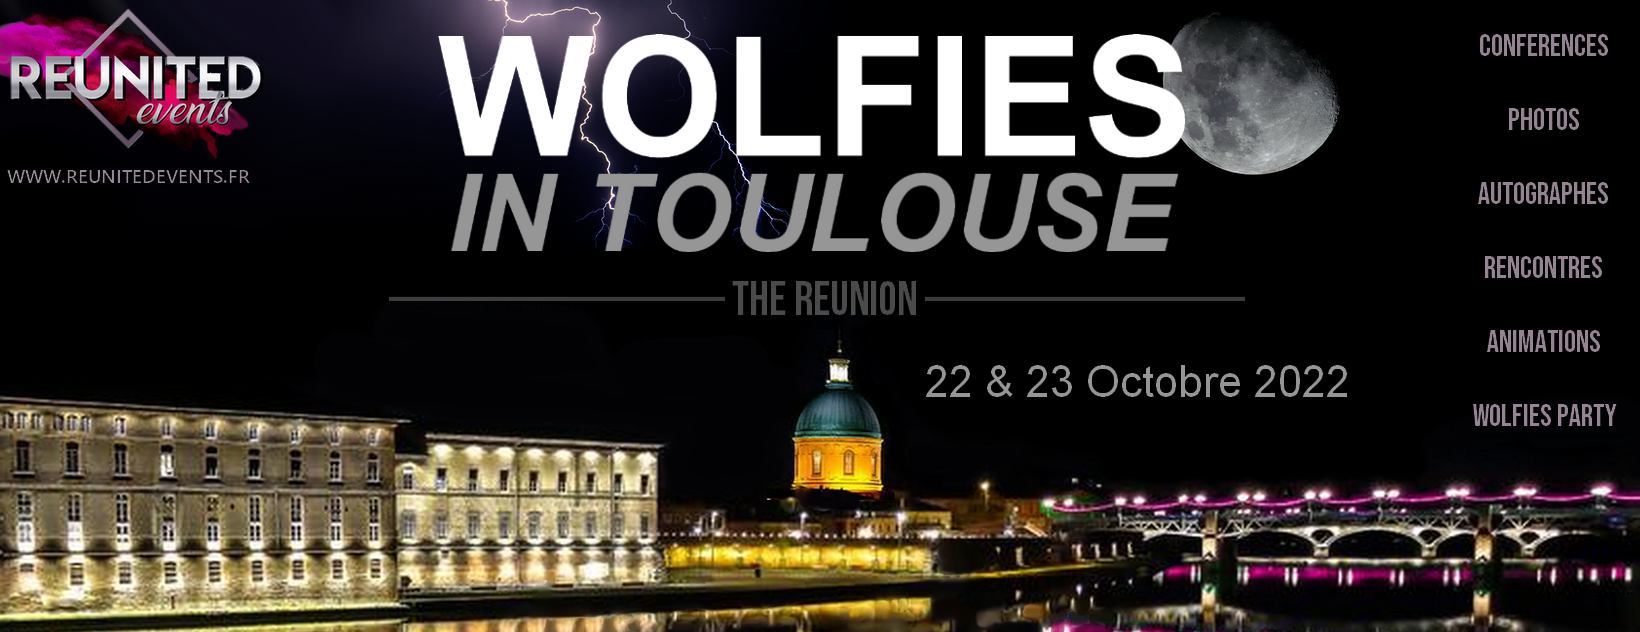 Wolfies in Toulouse - The Reunion